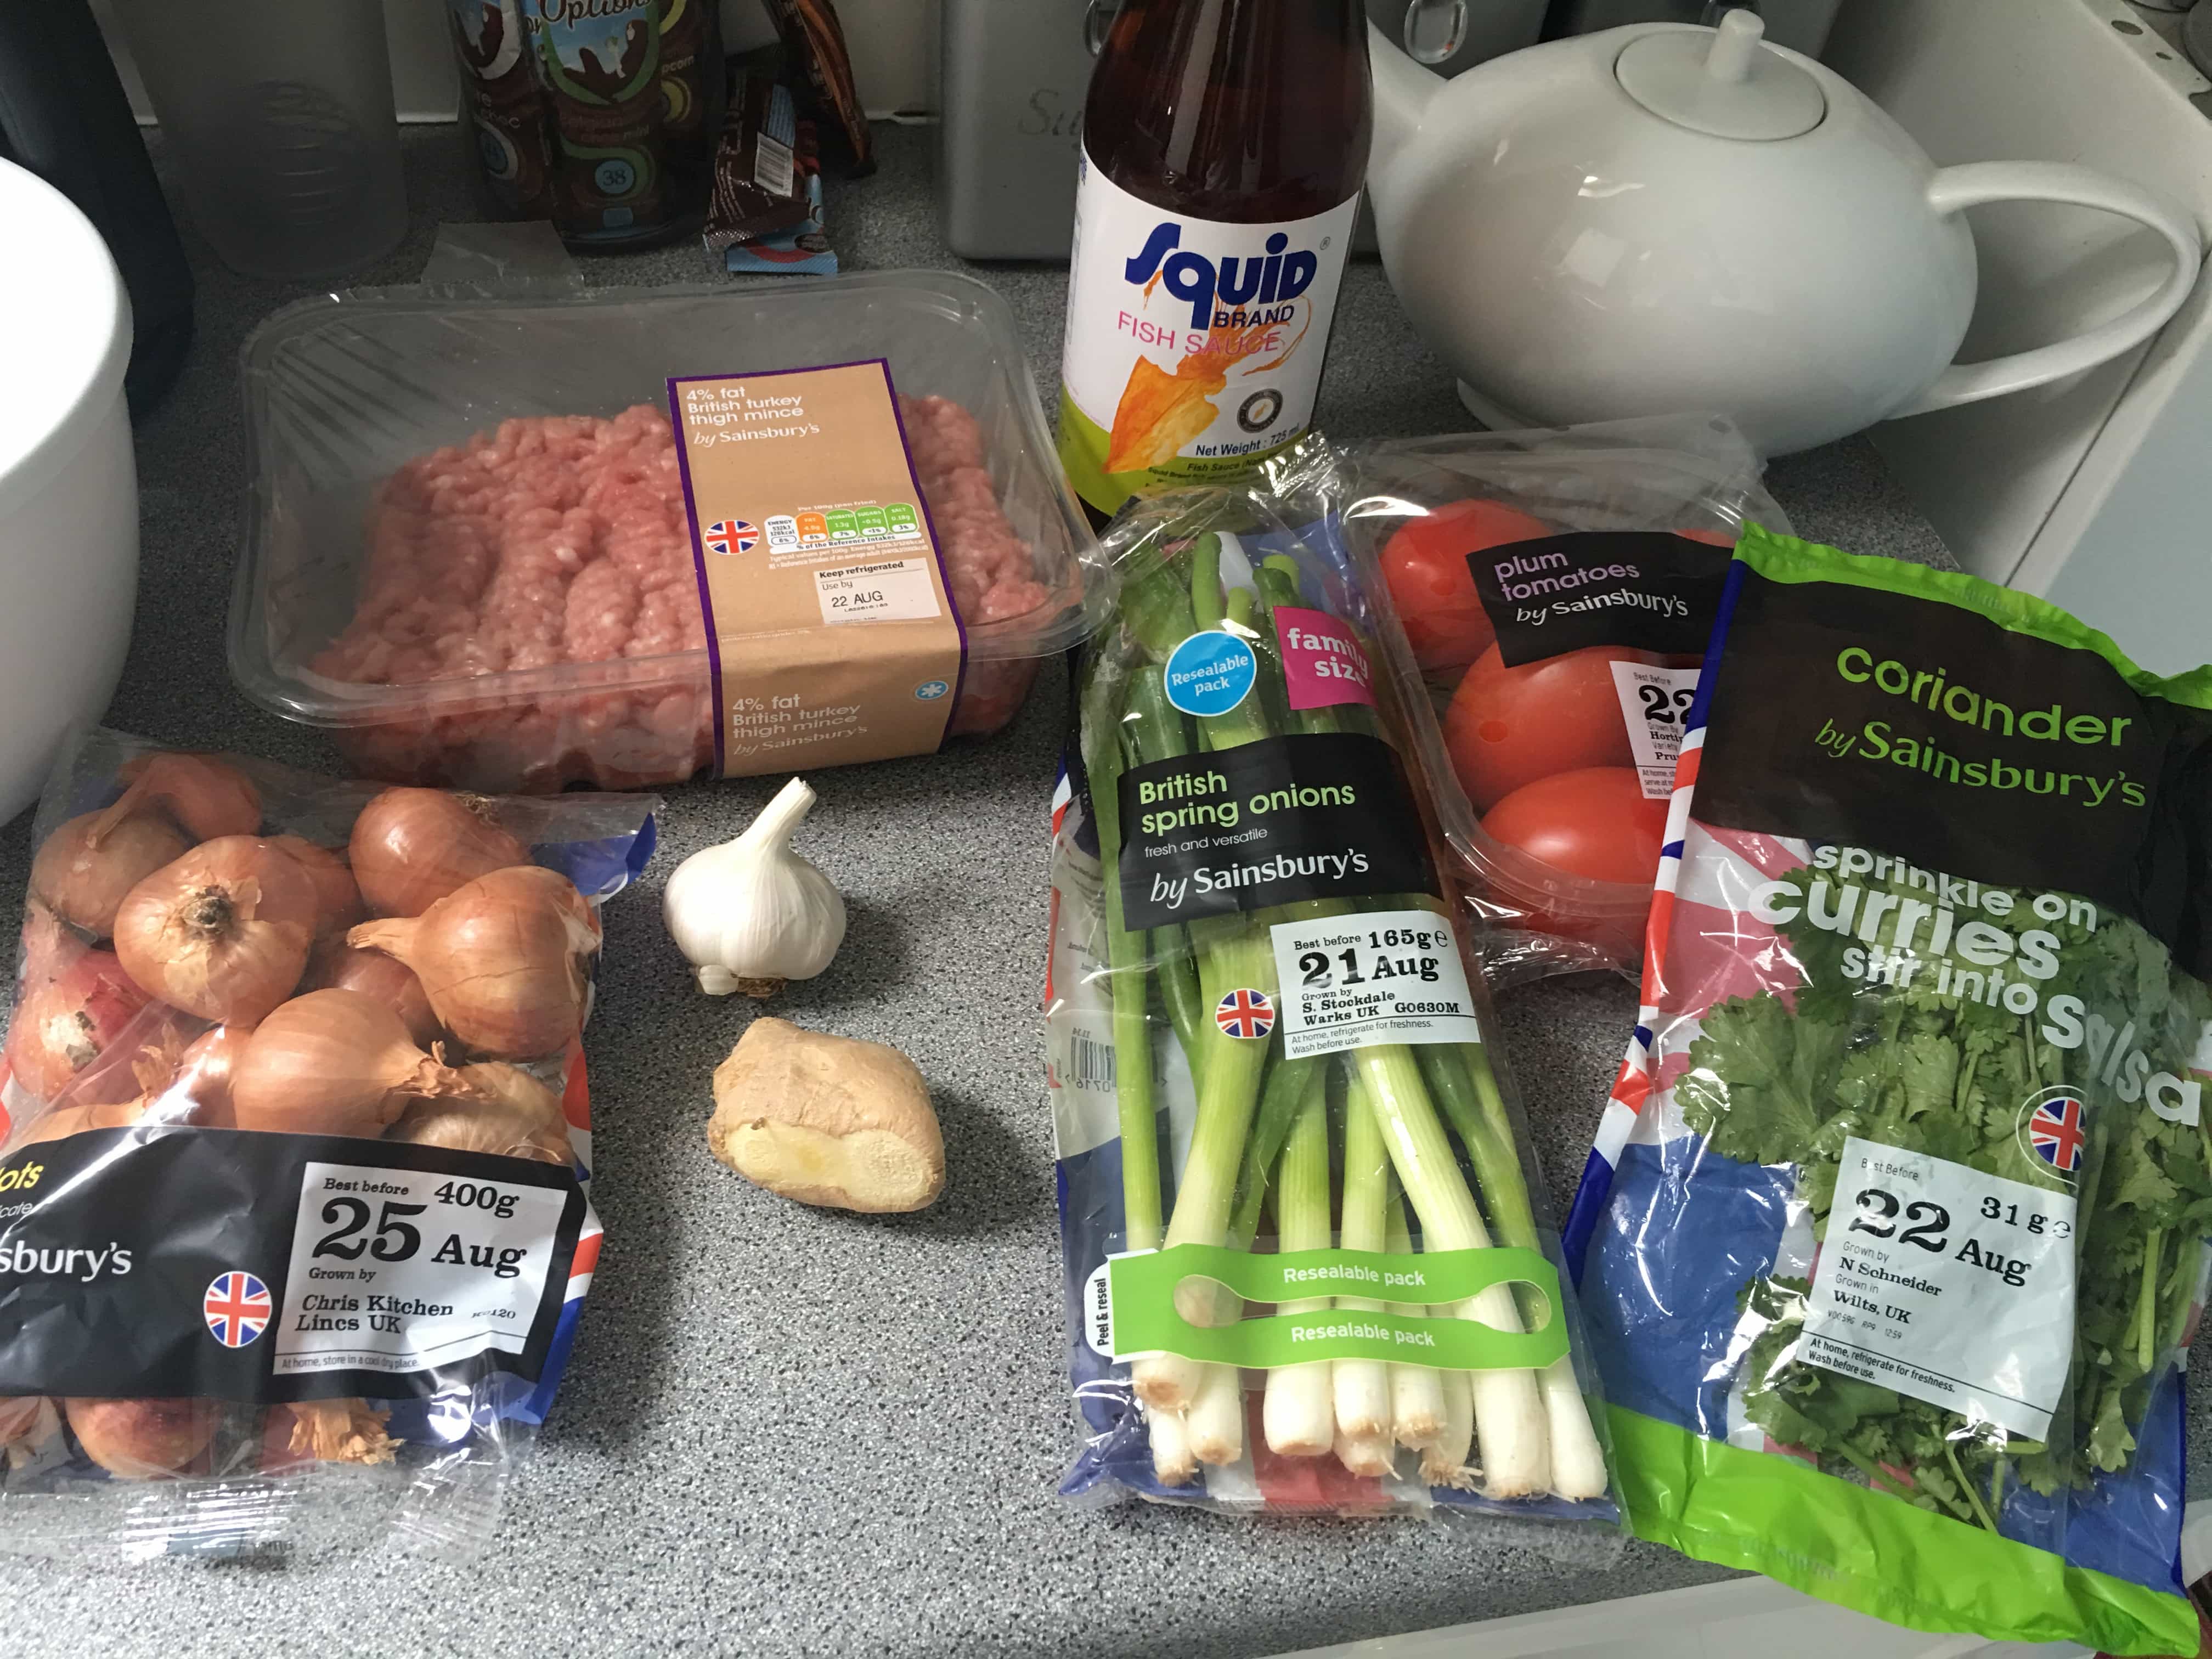 Ingredients for meatballs and tomato sauce